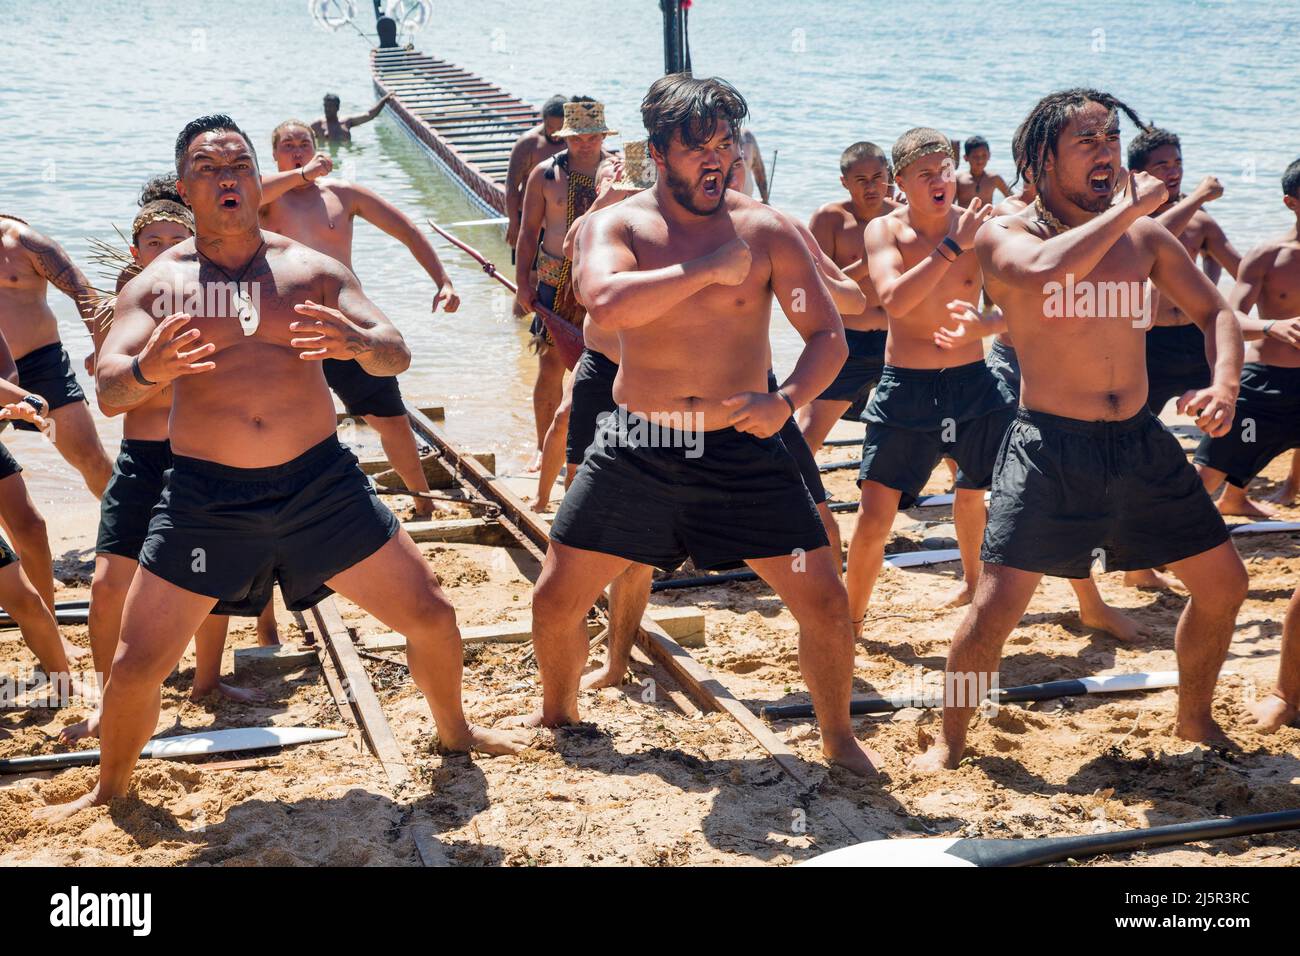 The haka is a traditional war cry, war dance, or challenge in Māori culture. On the photo it is performed during Waitingi day. Waitangi Day is the nat Stock Photo